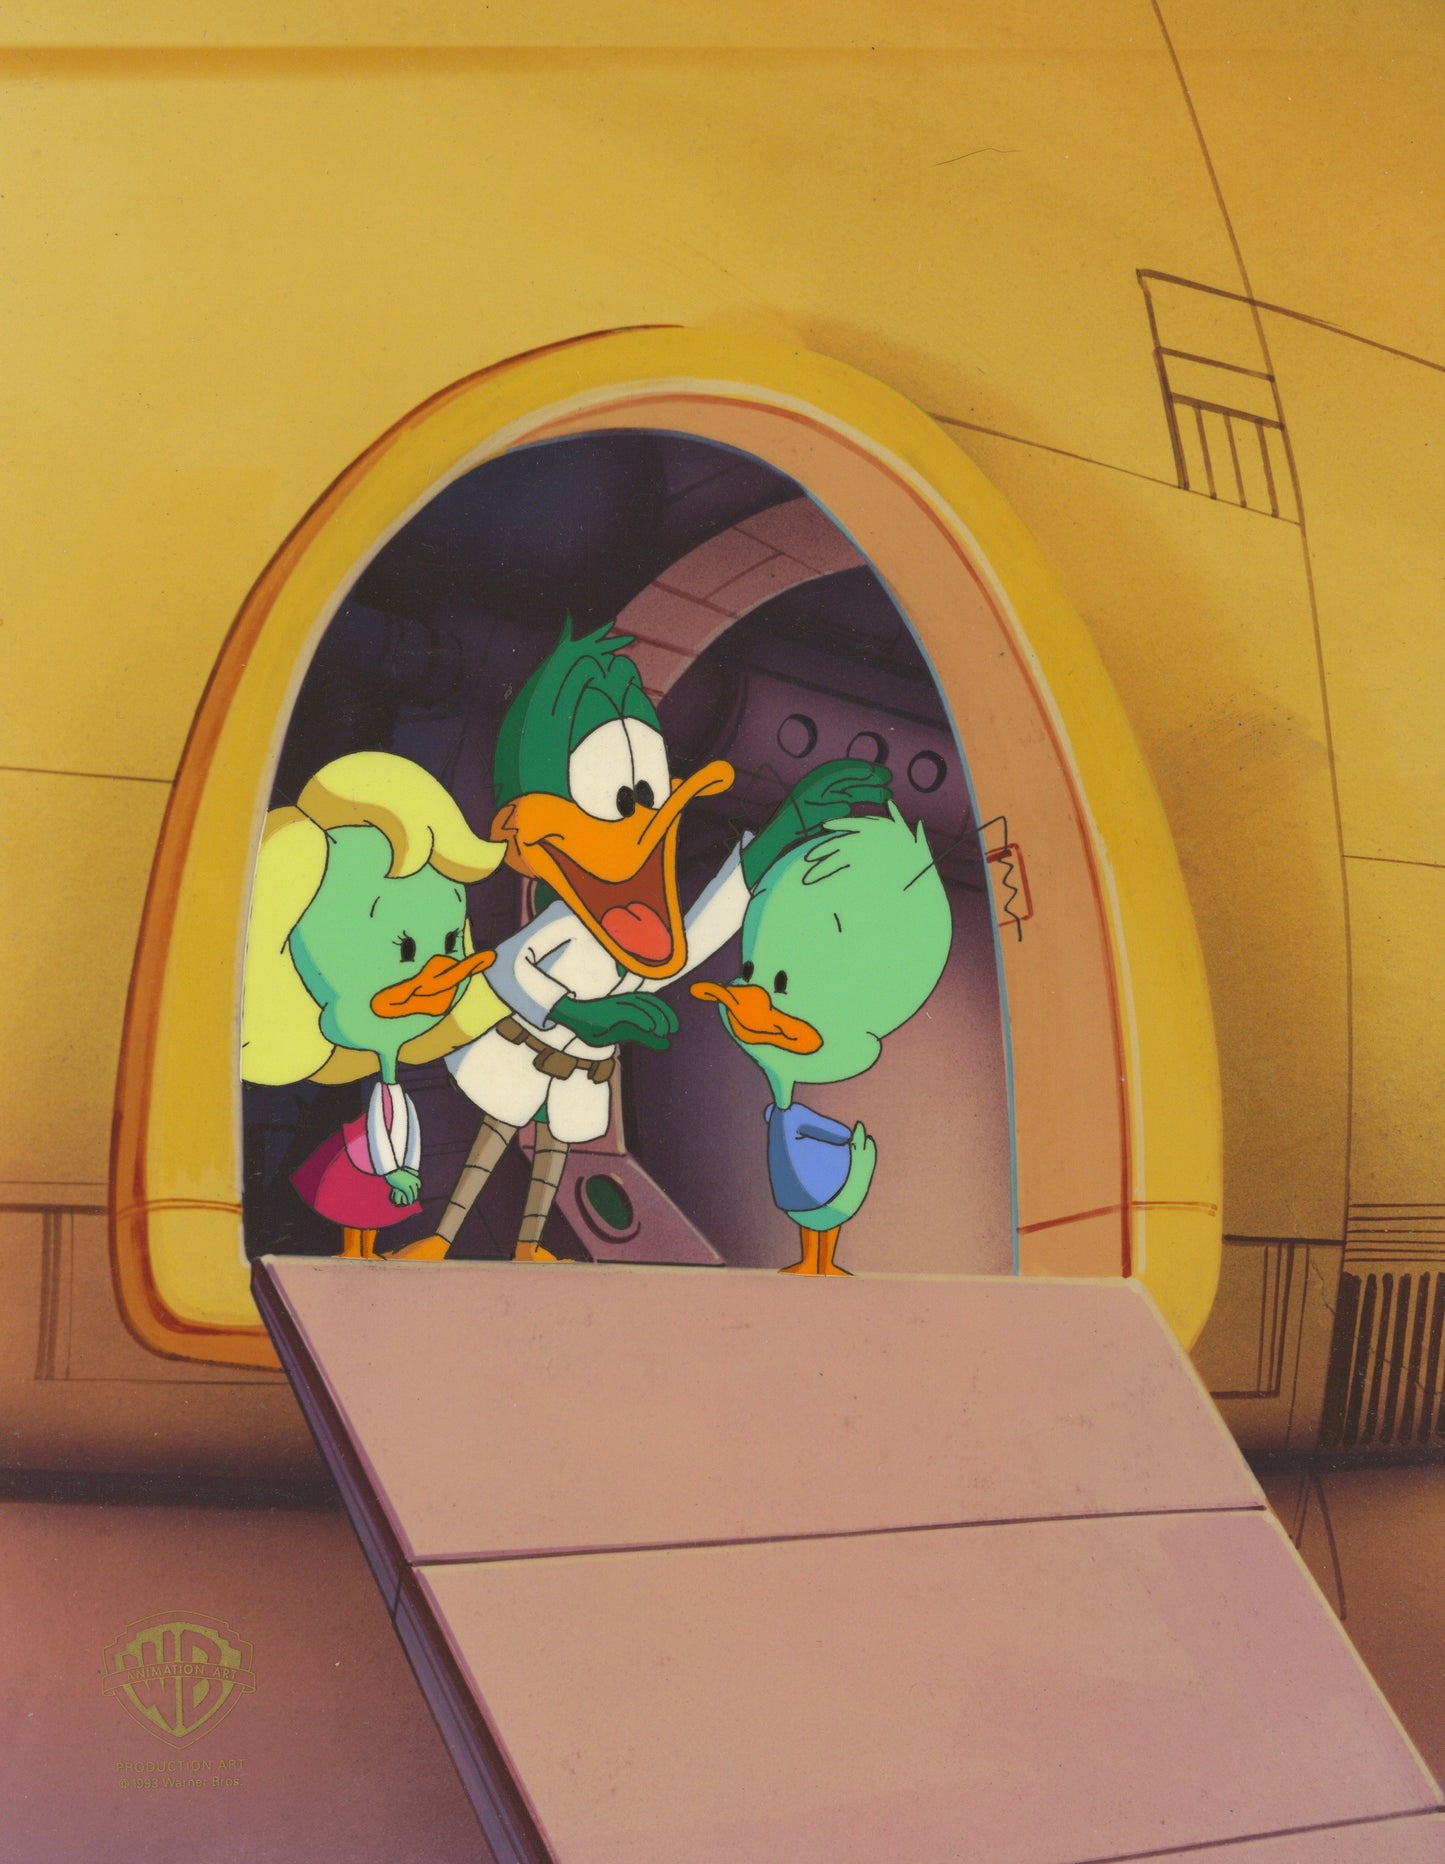 Tiny Toons Original Production Cel: Plucky, Frank, and Ollie